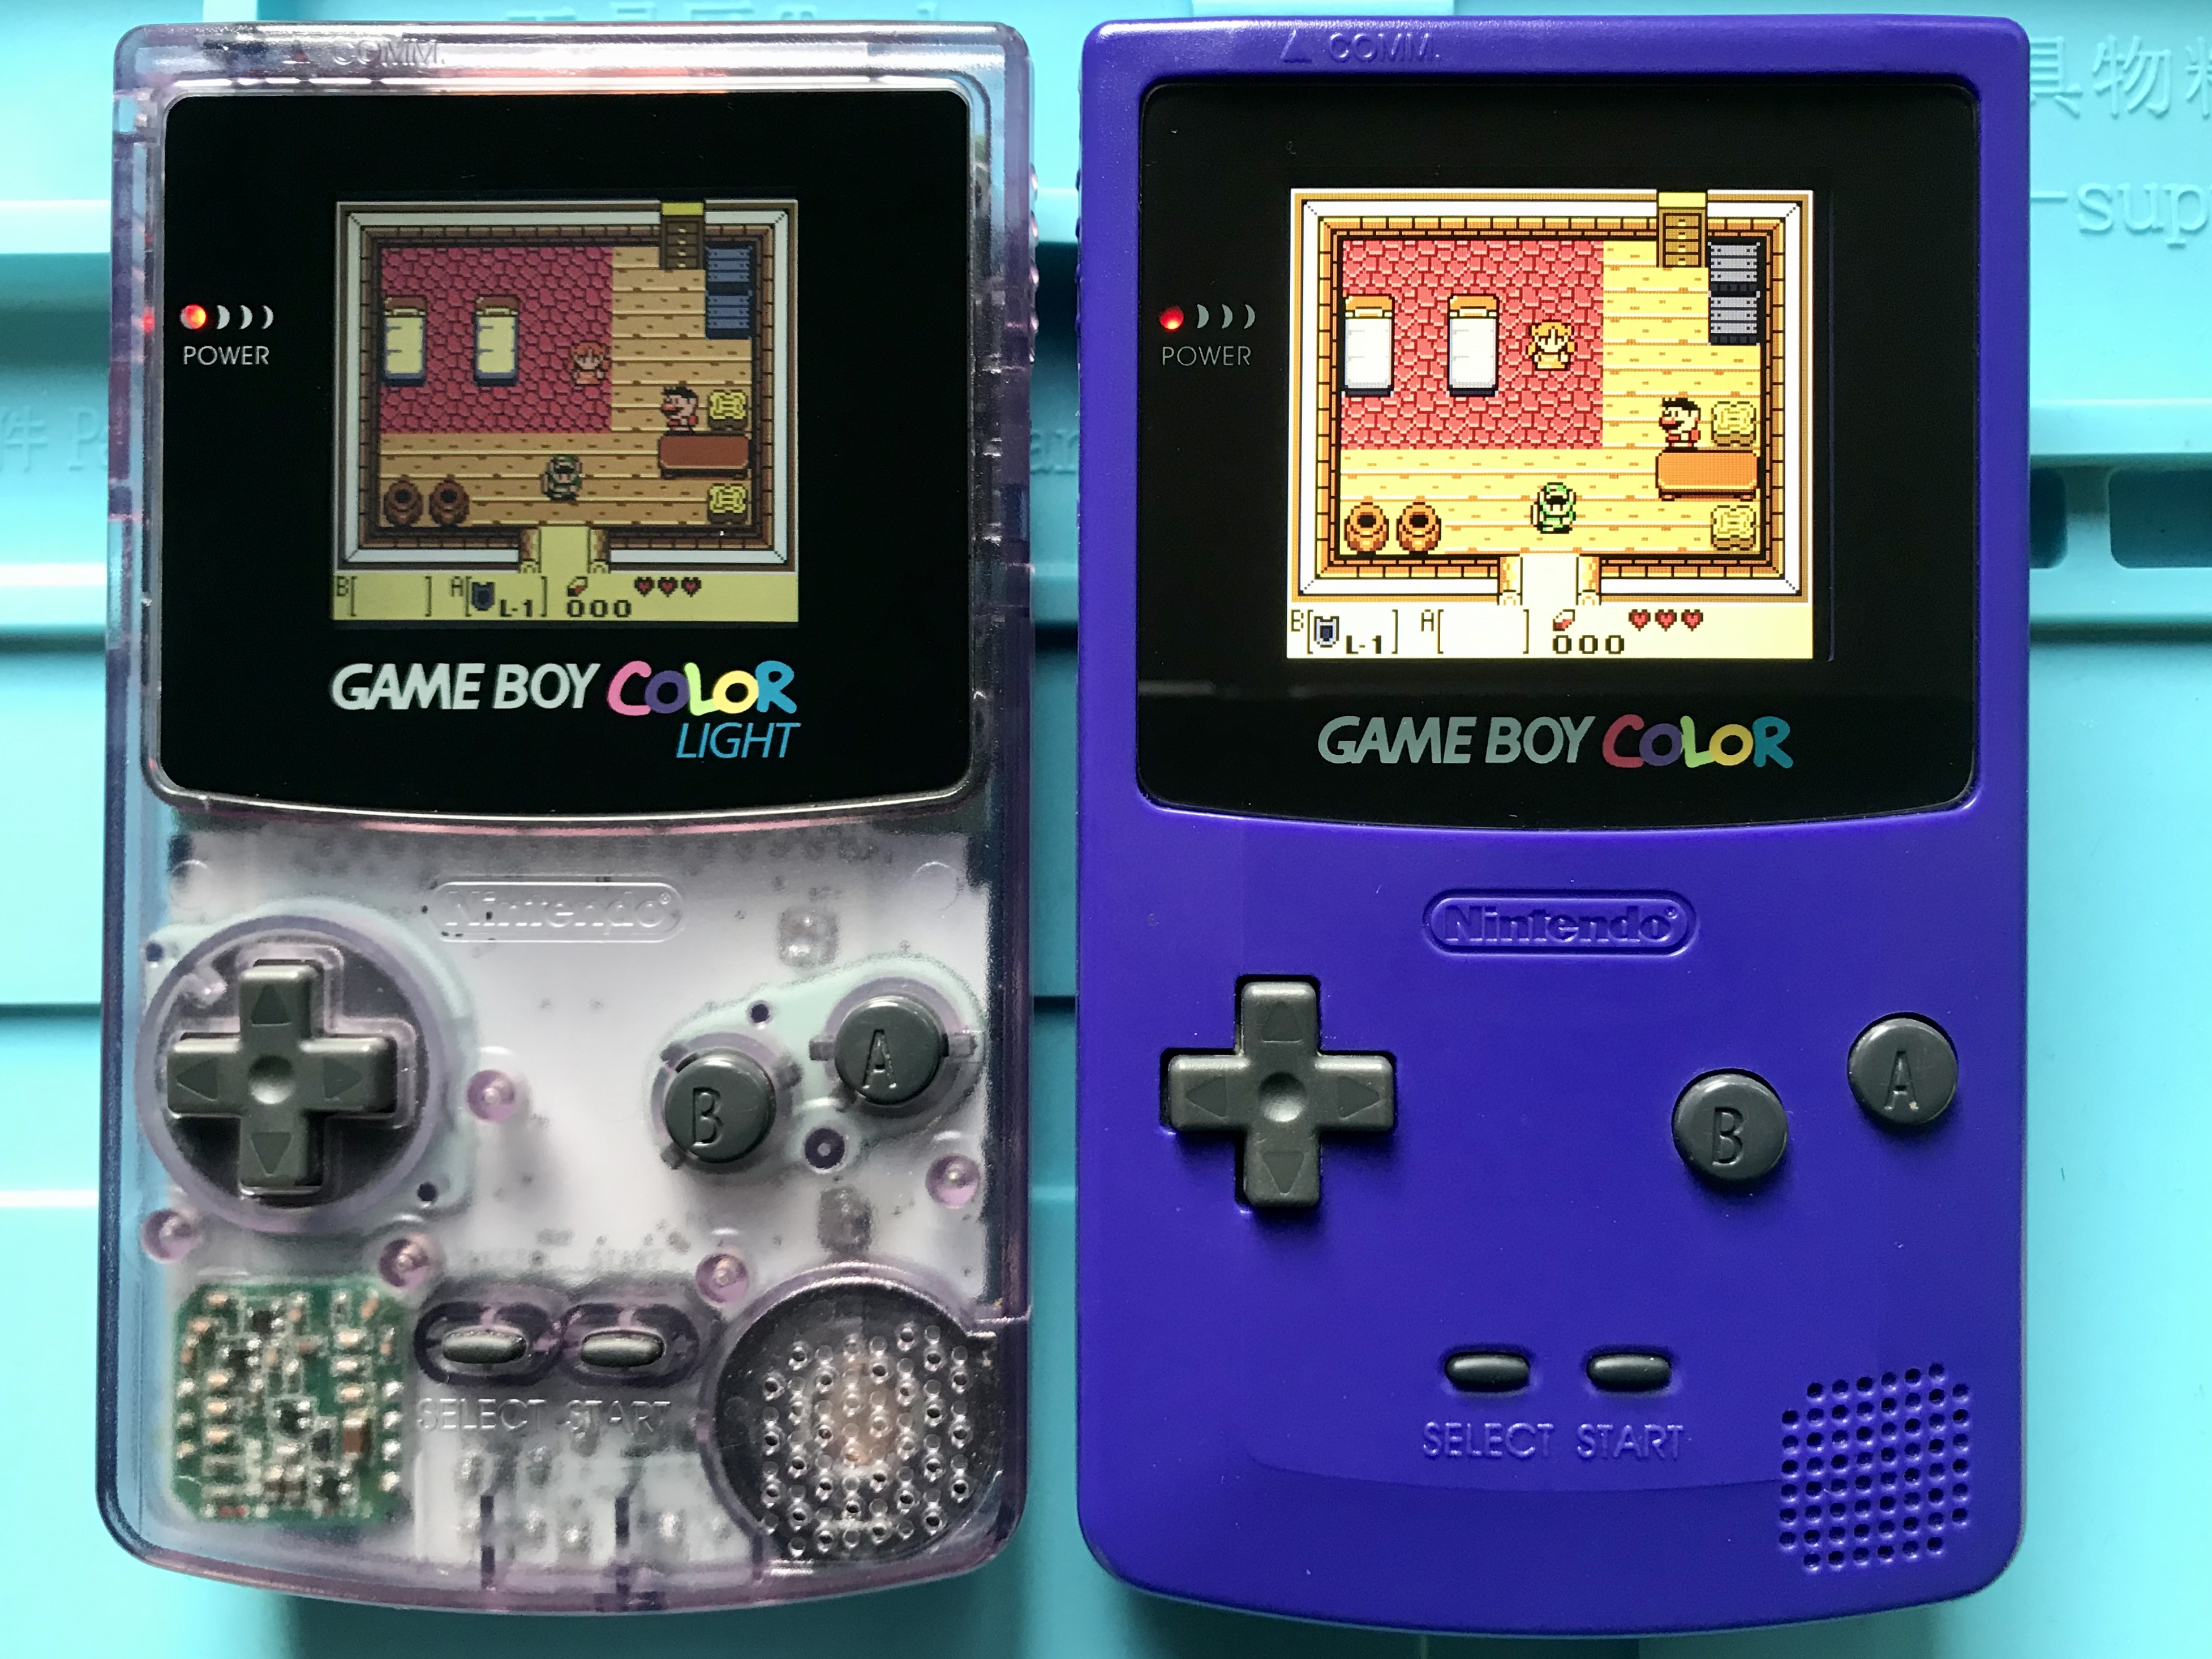 A smaller backlit TFT screen and a full-size IPS Game Boy Color screen mod both set to their maximum brightness.